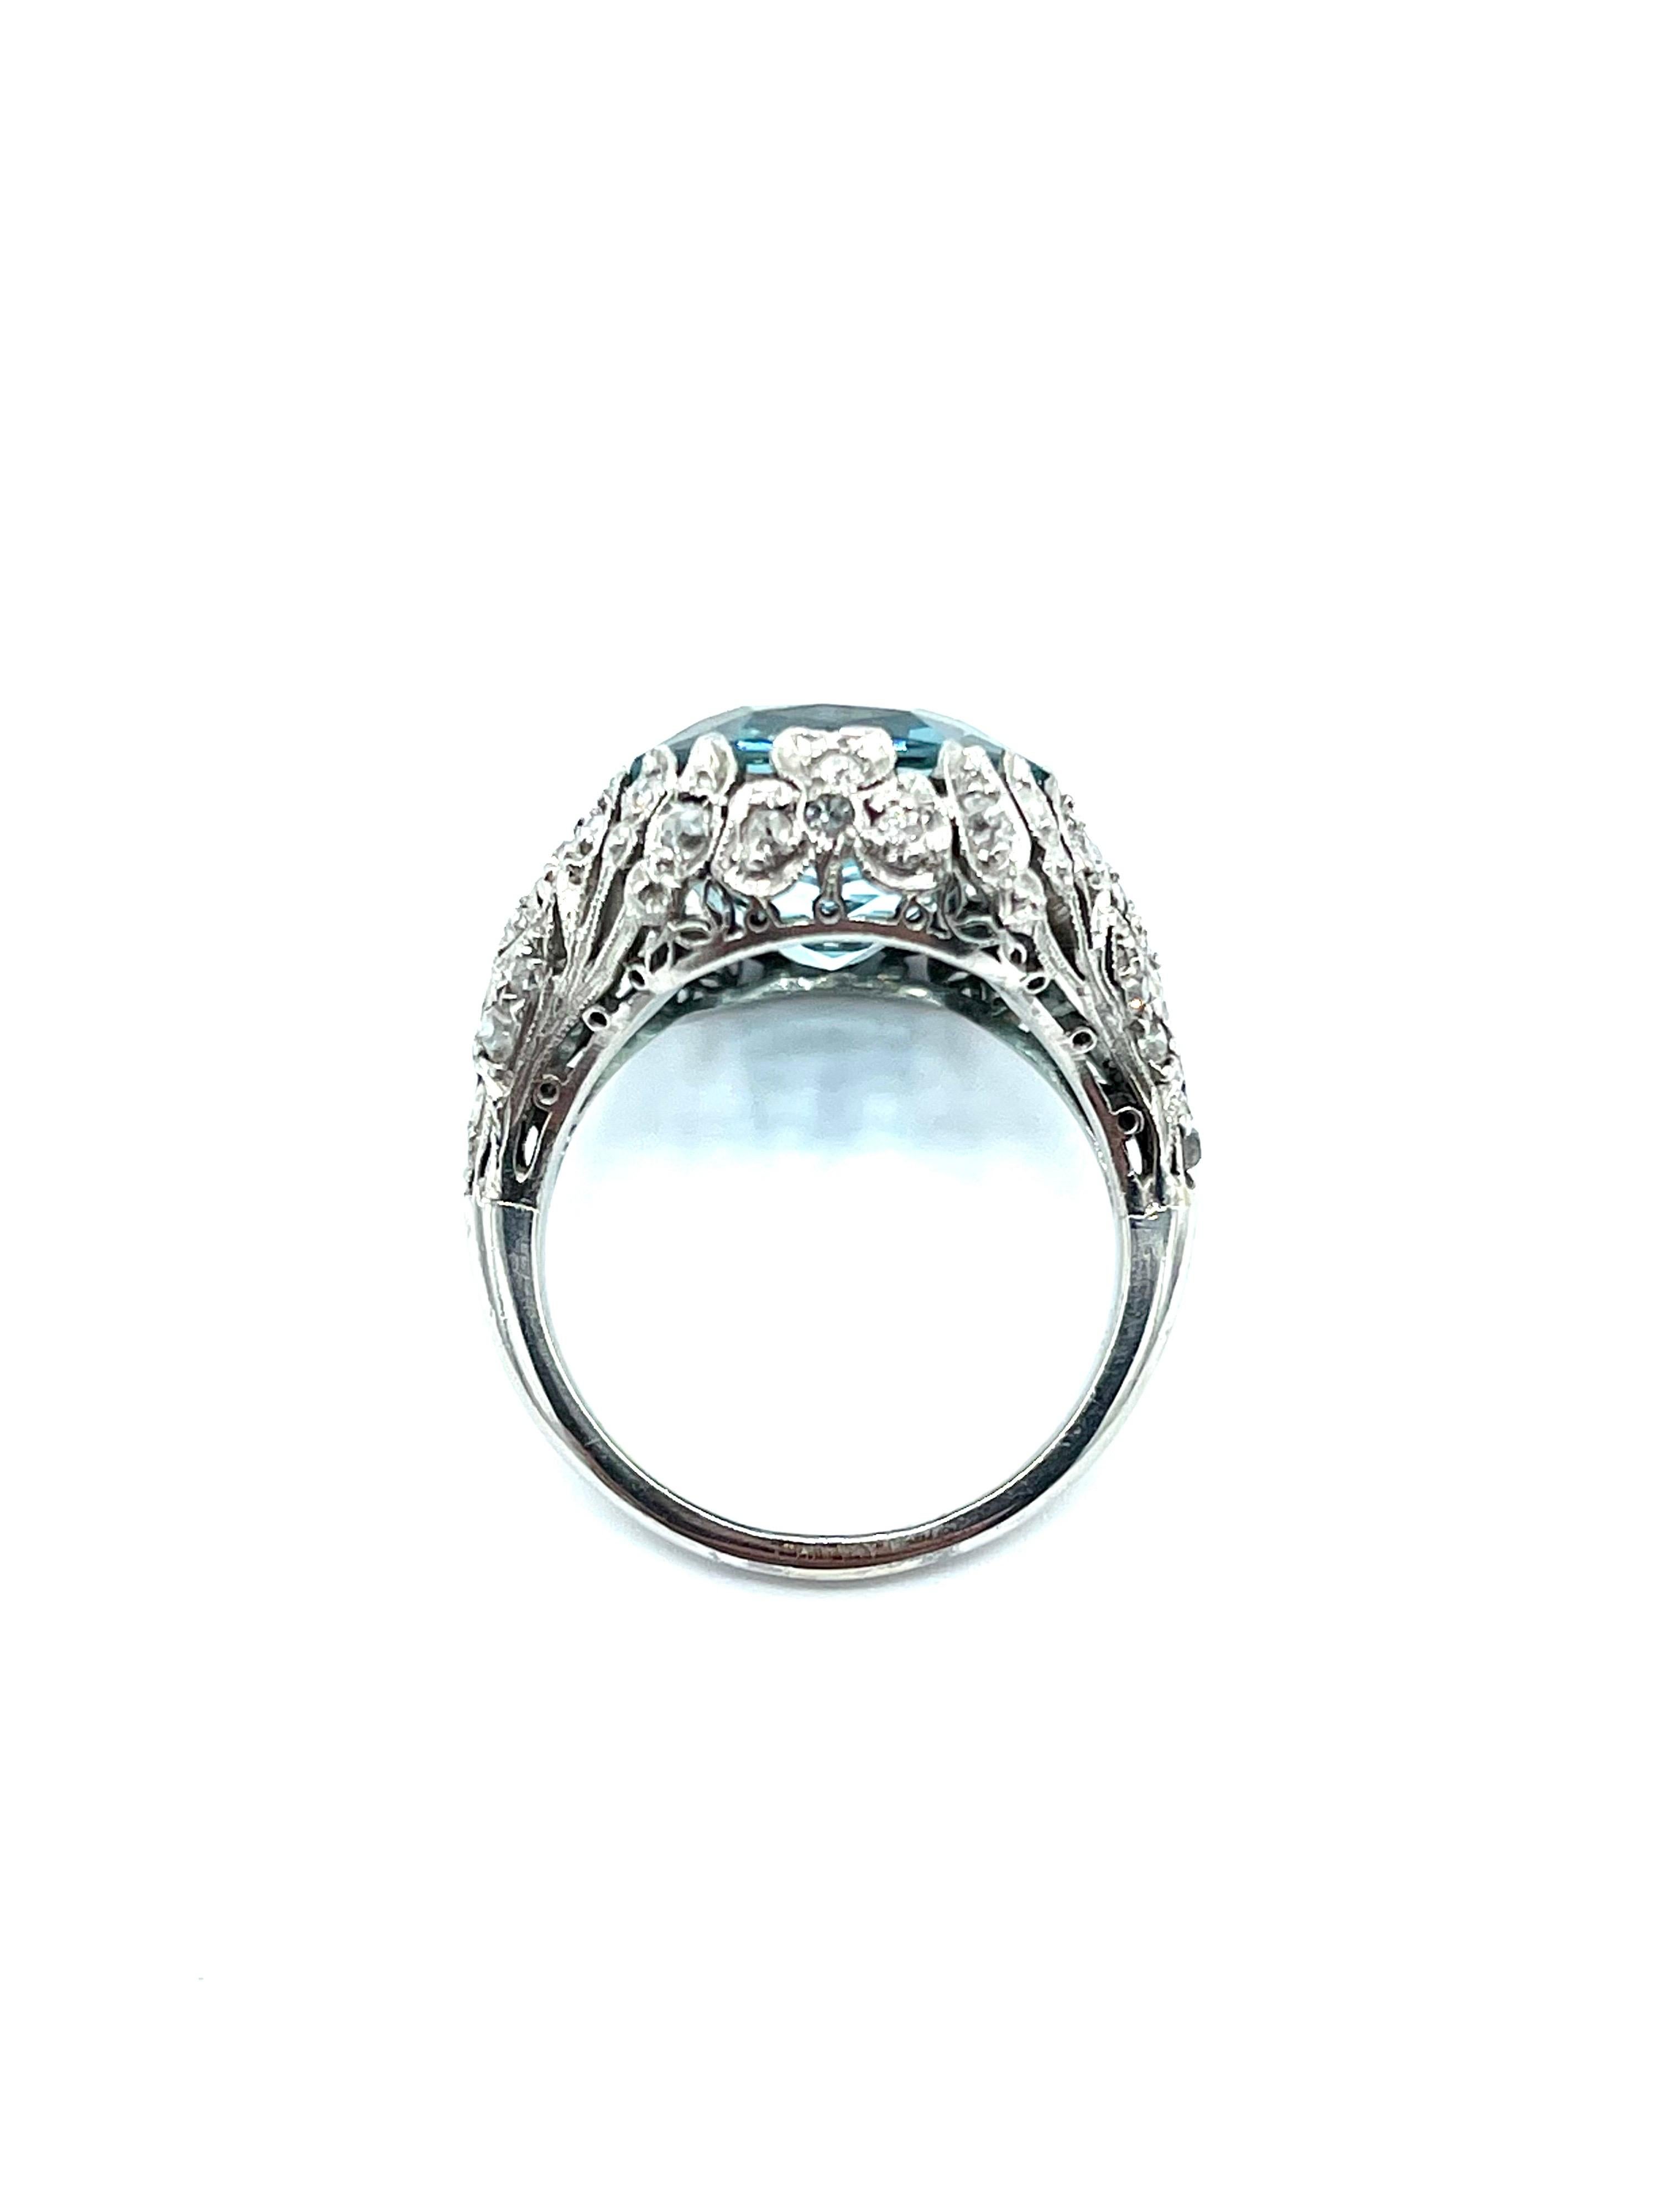 Art Deco 8.95 Carat Cushion Shaped Aquamarine and Diamond Platinum Cocktail Ring In Excellent Condition For Sale In Chevy Chase, MD